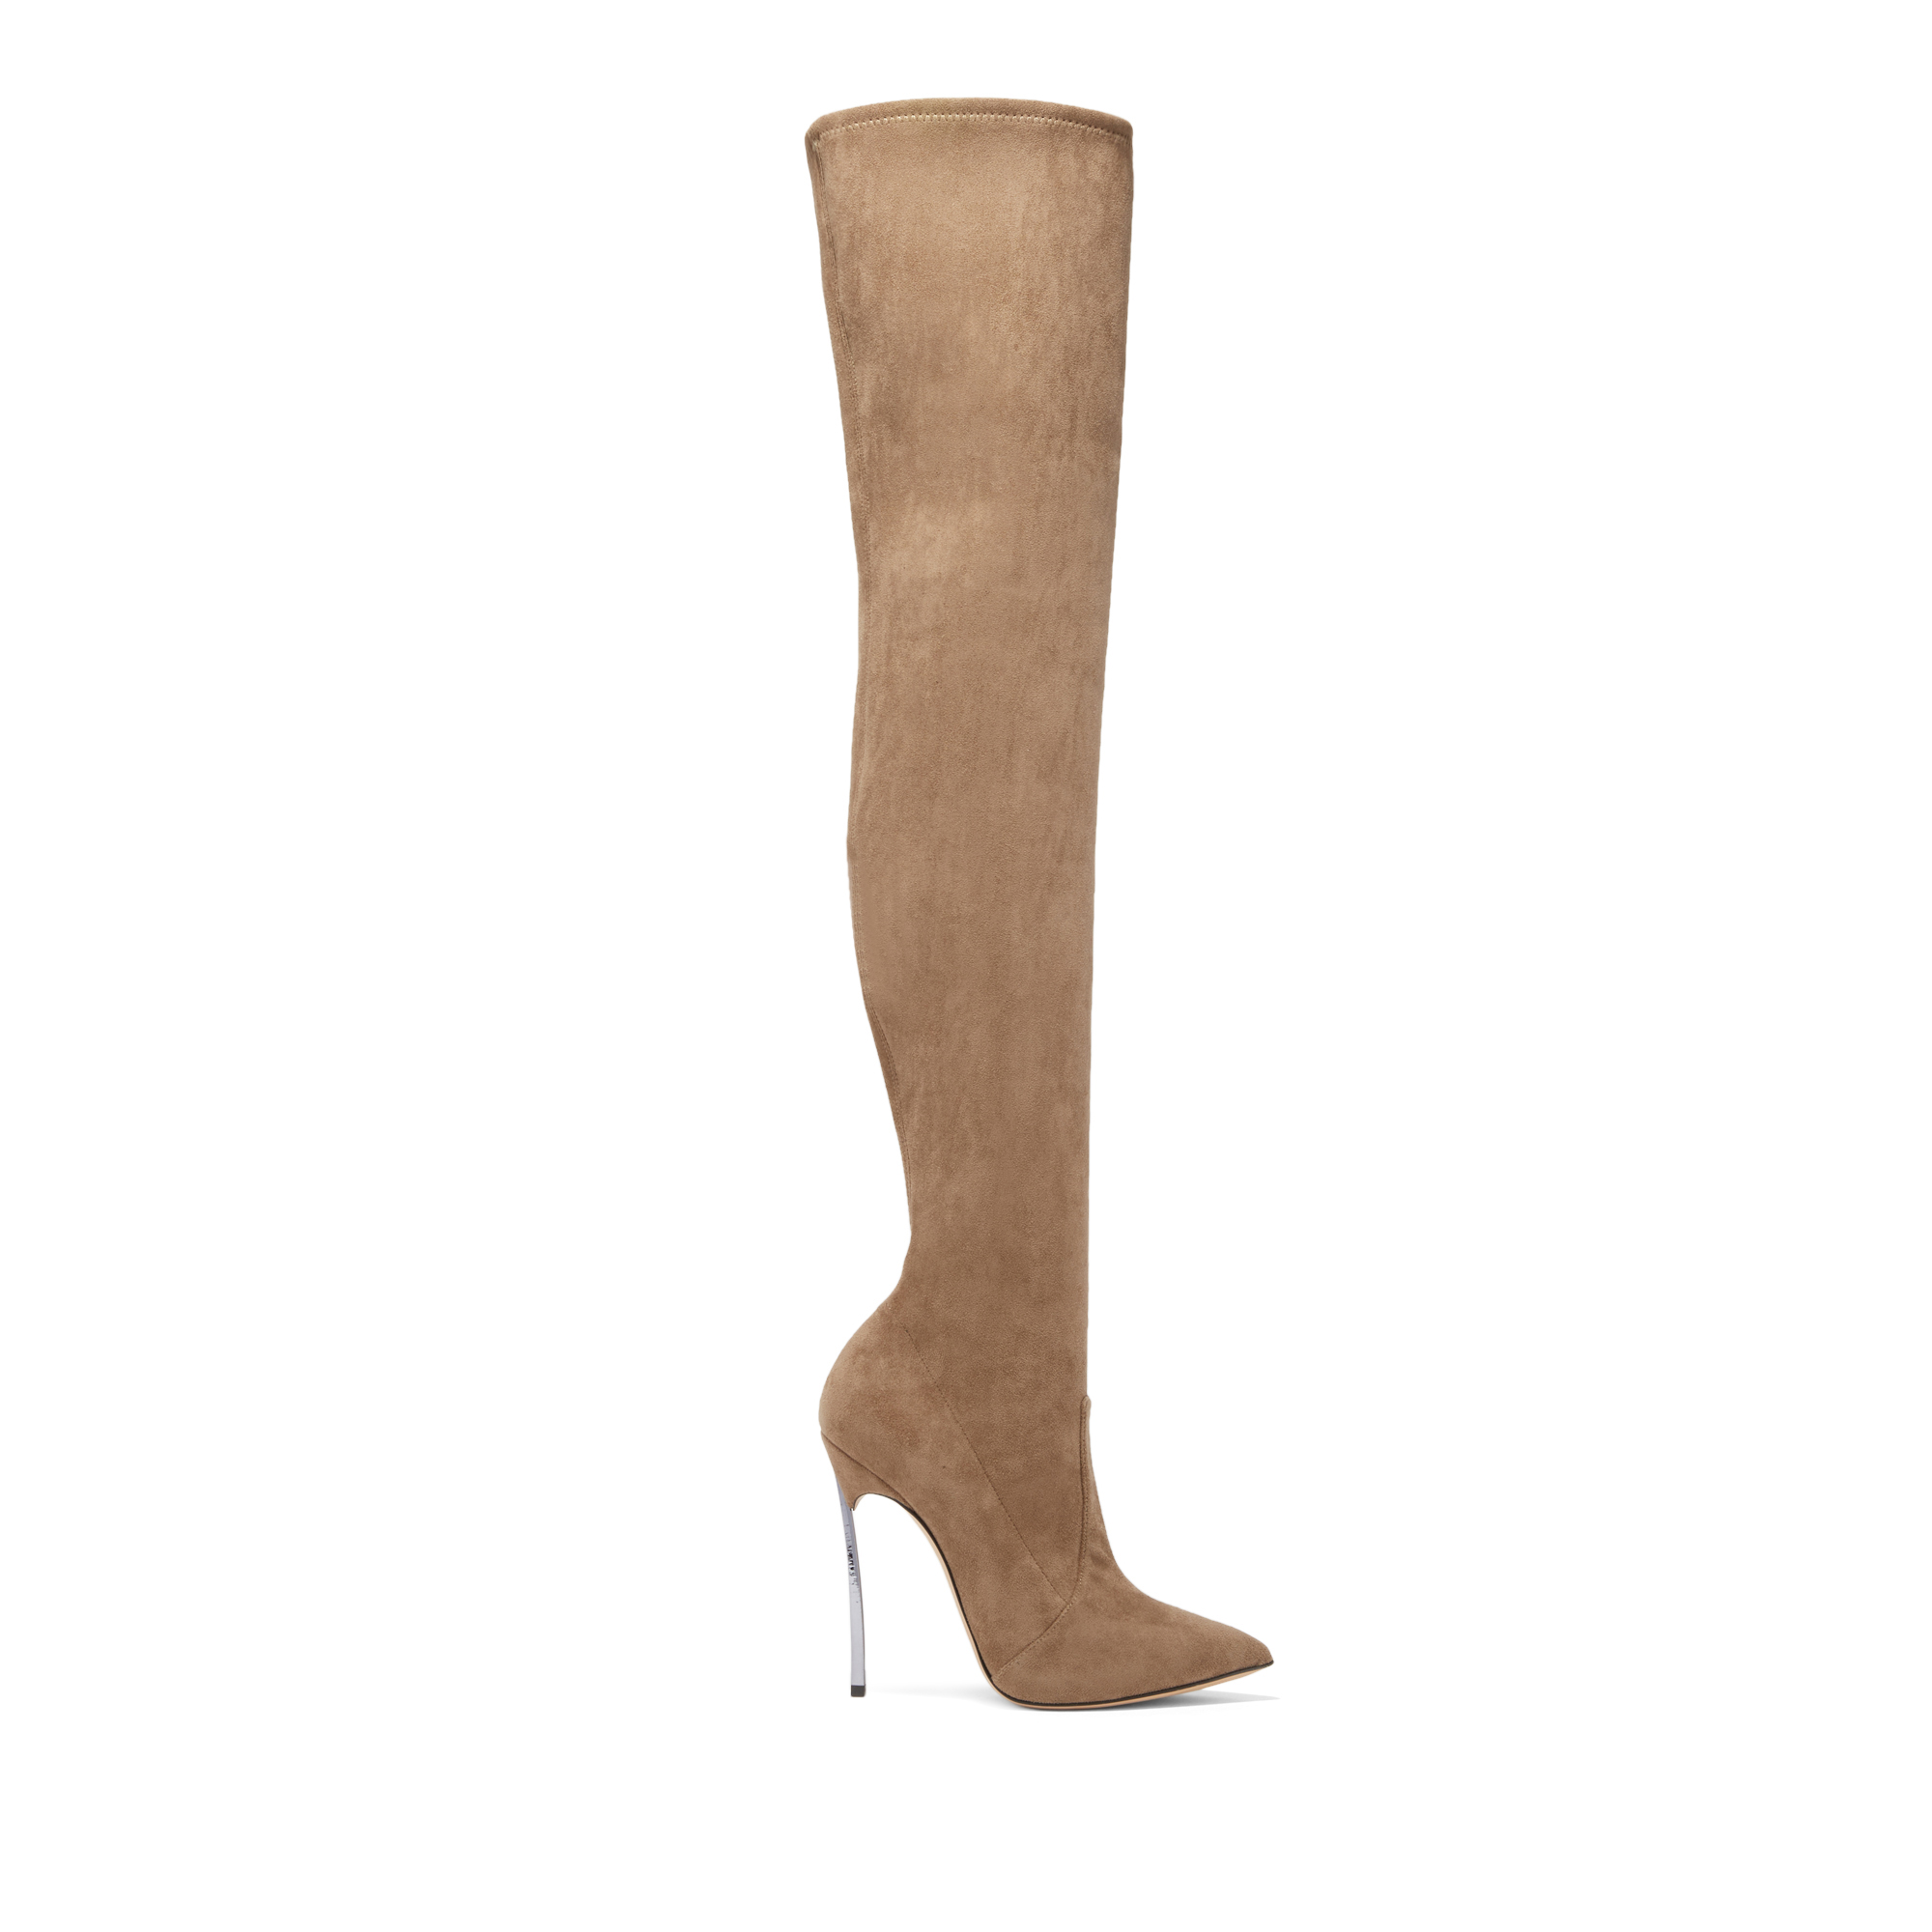 Casadei Blade Eco Suede - Woman Over The Knee Boots Mud 39